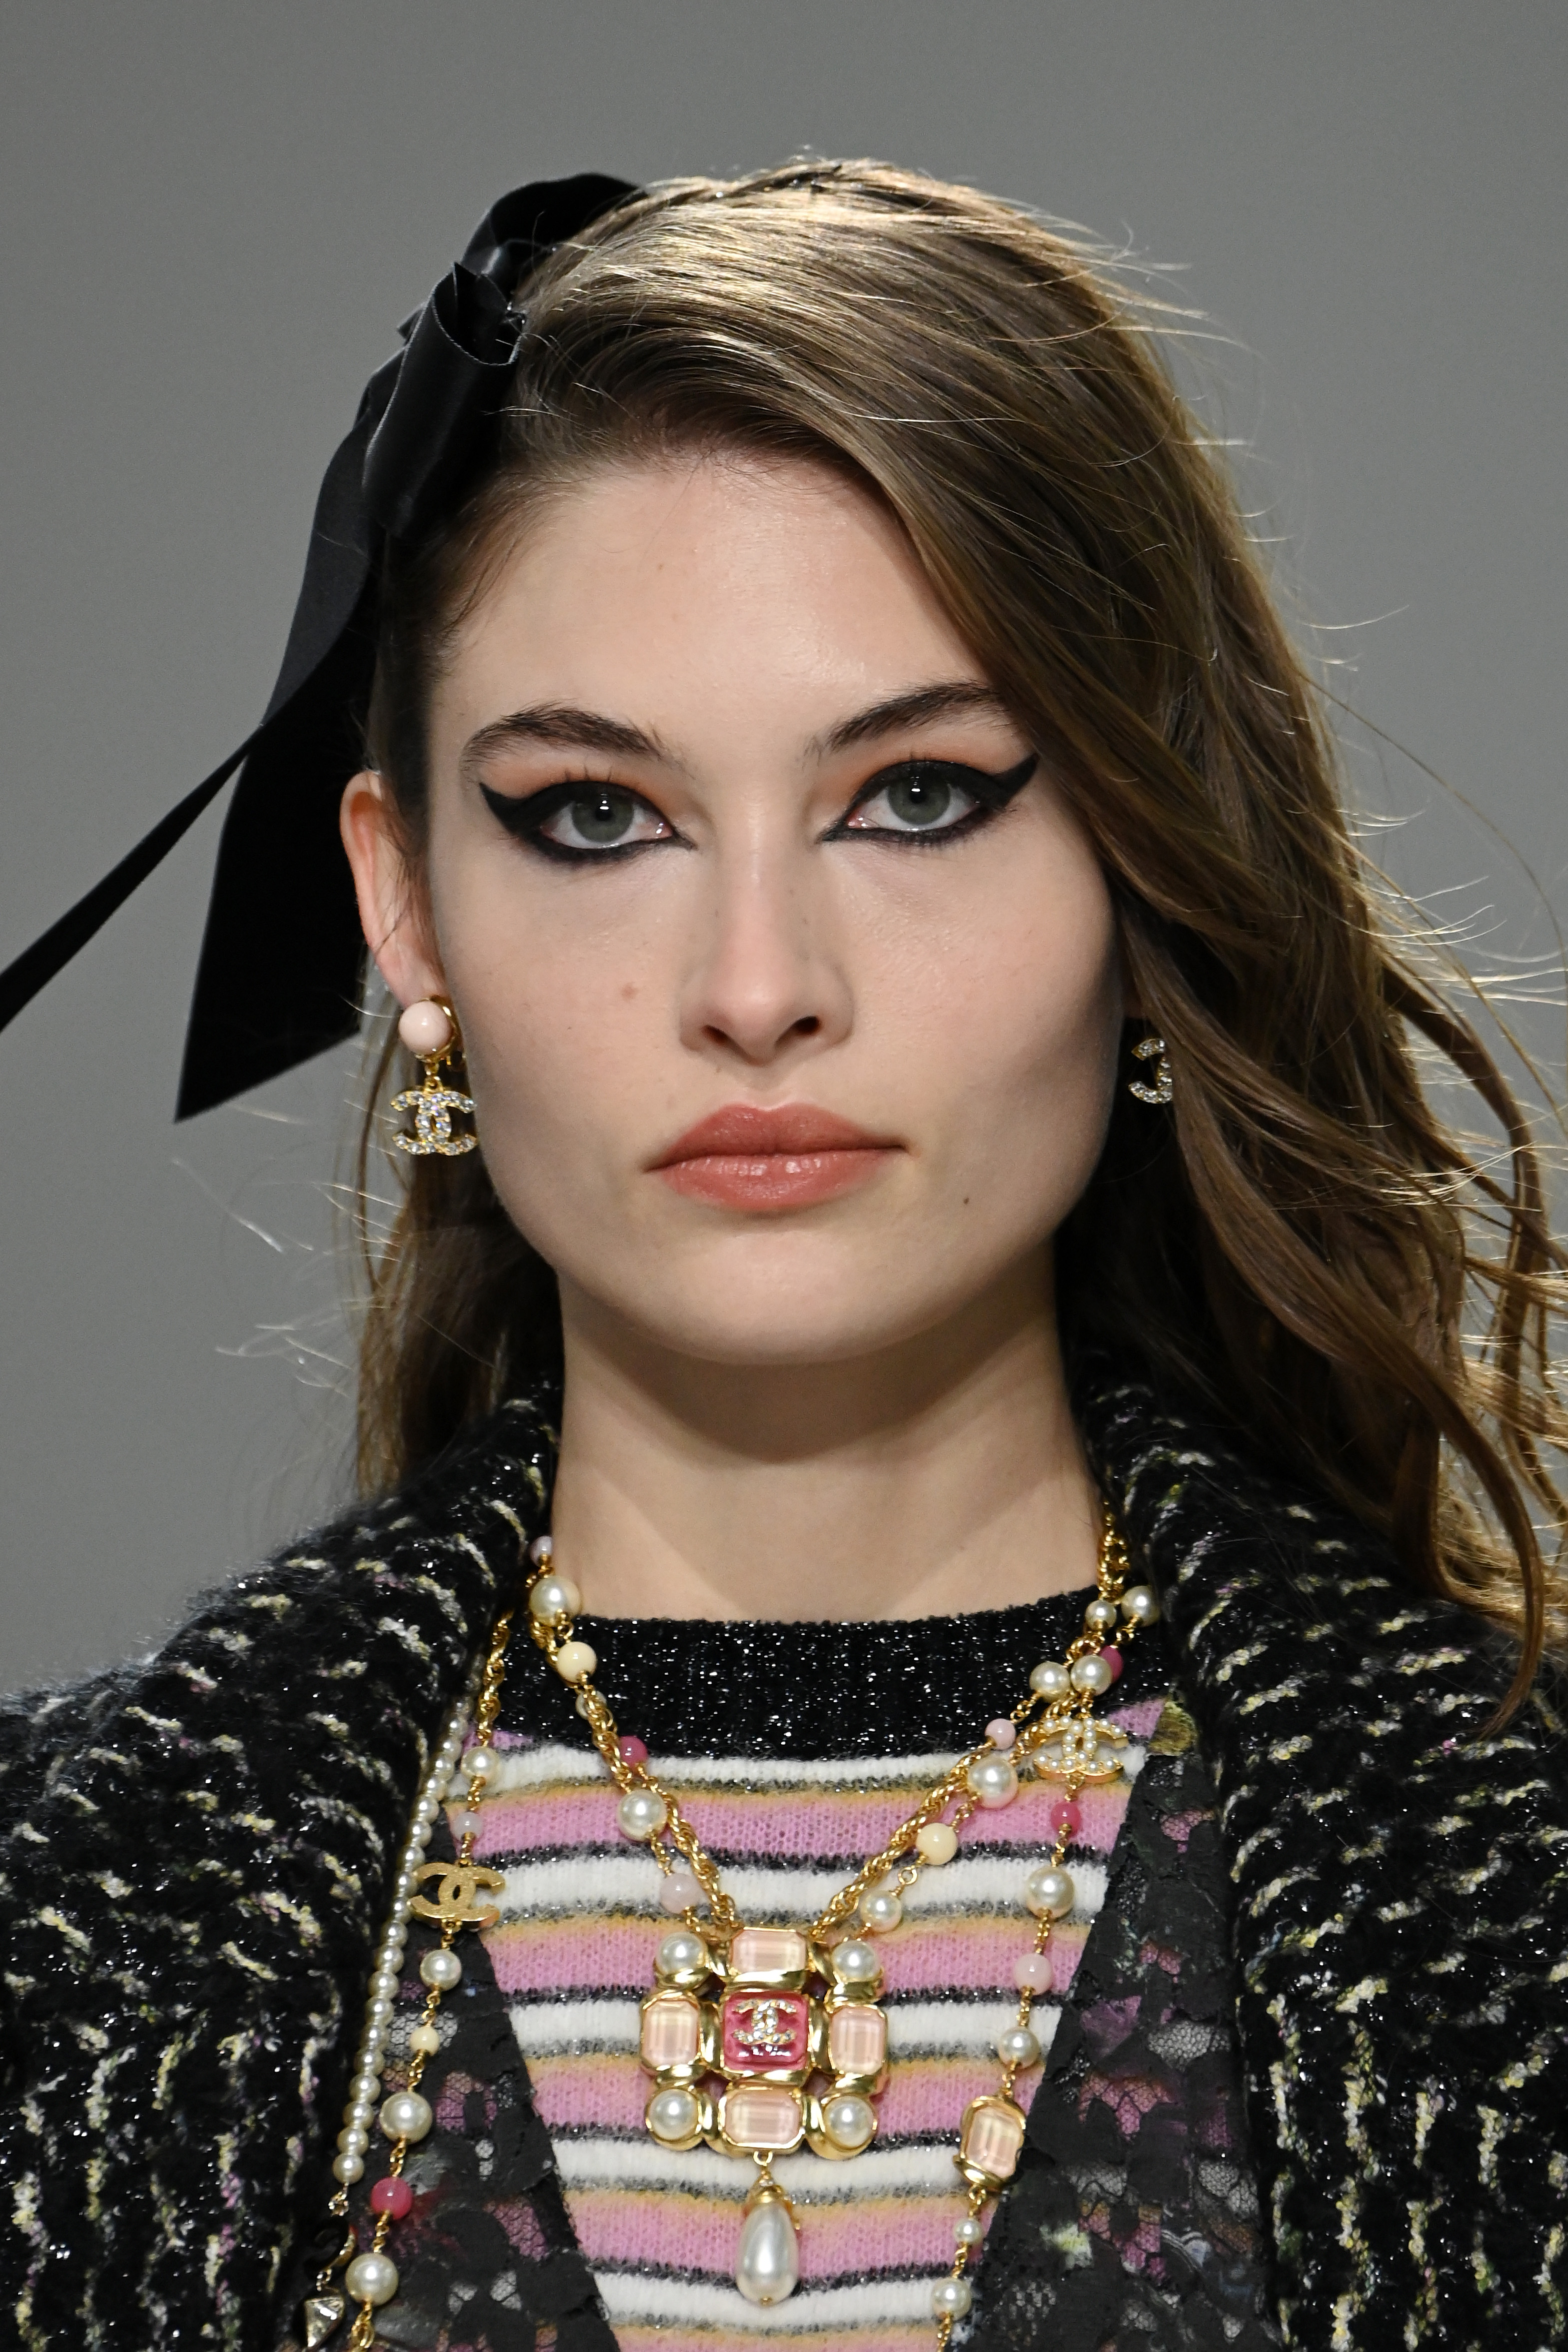 11 Dreamy Looks From Chanel's Métiers d'Art 2021 Collection